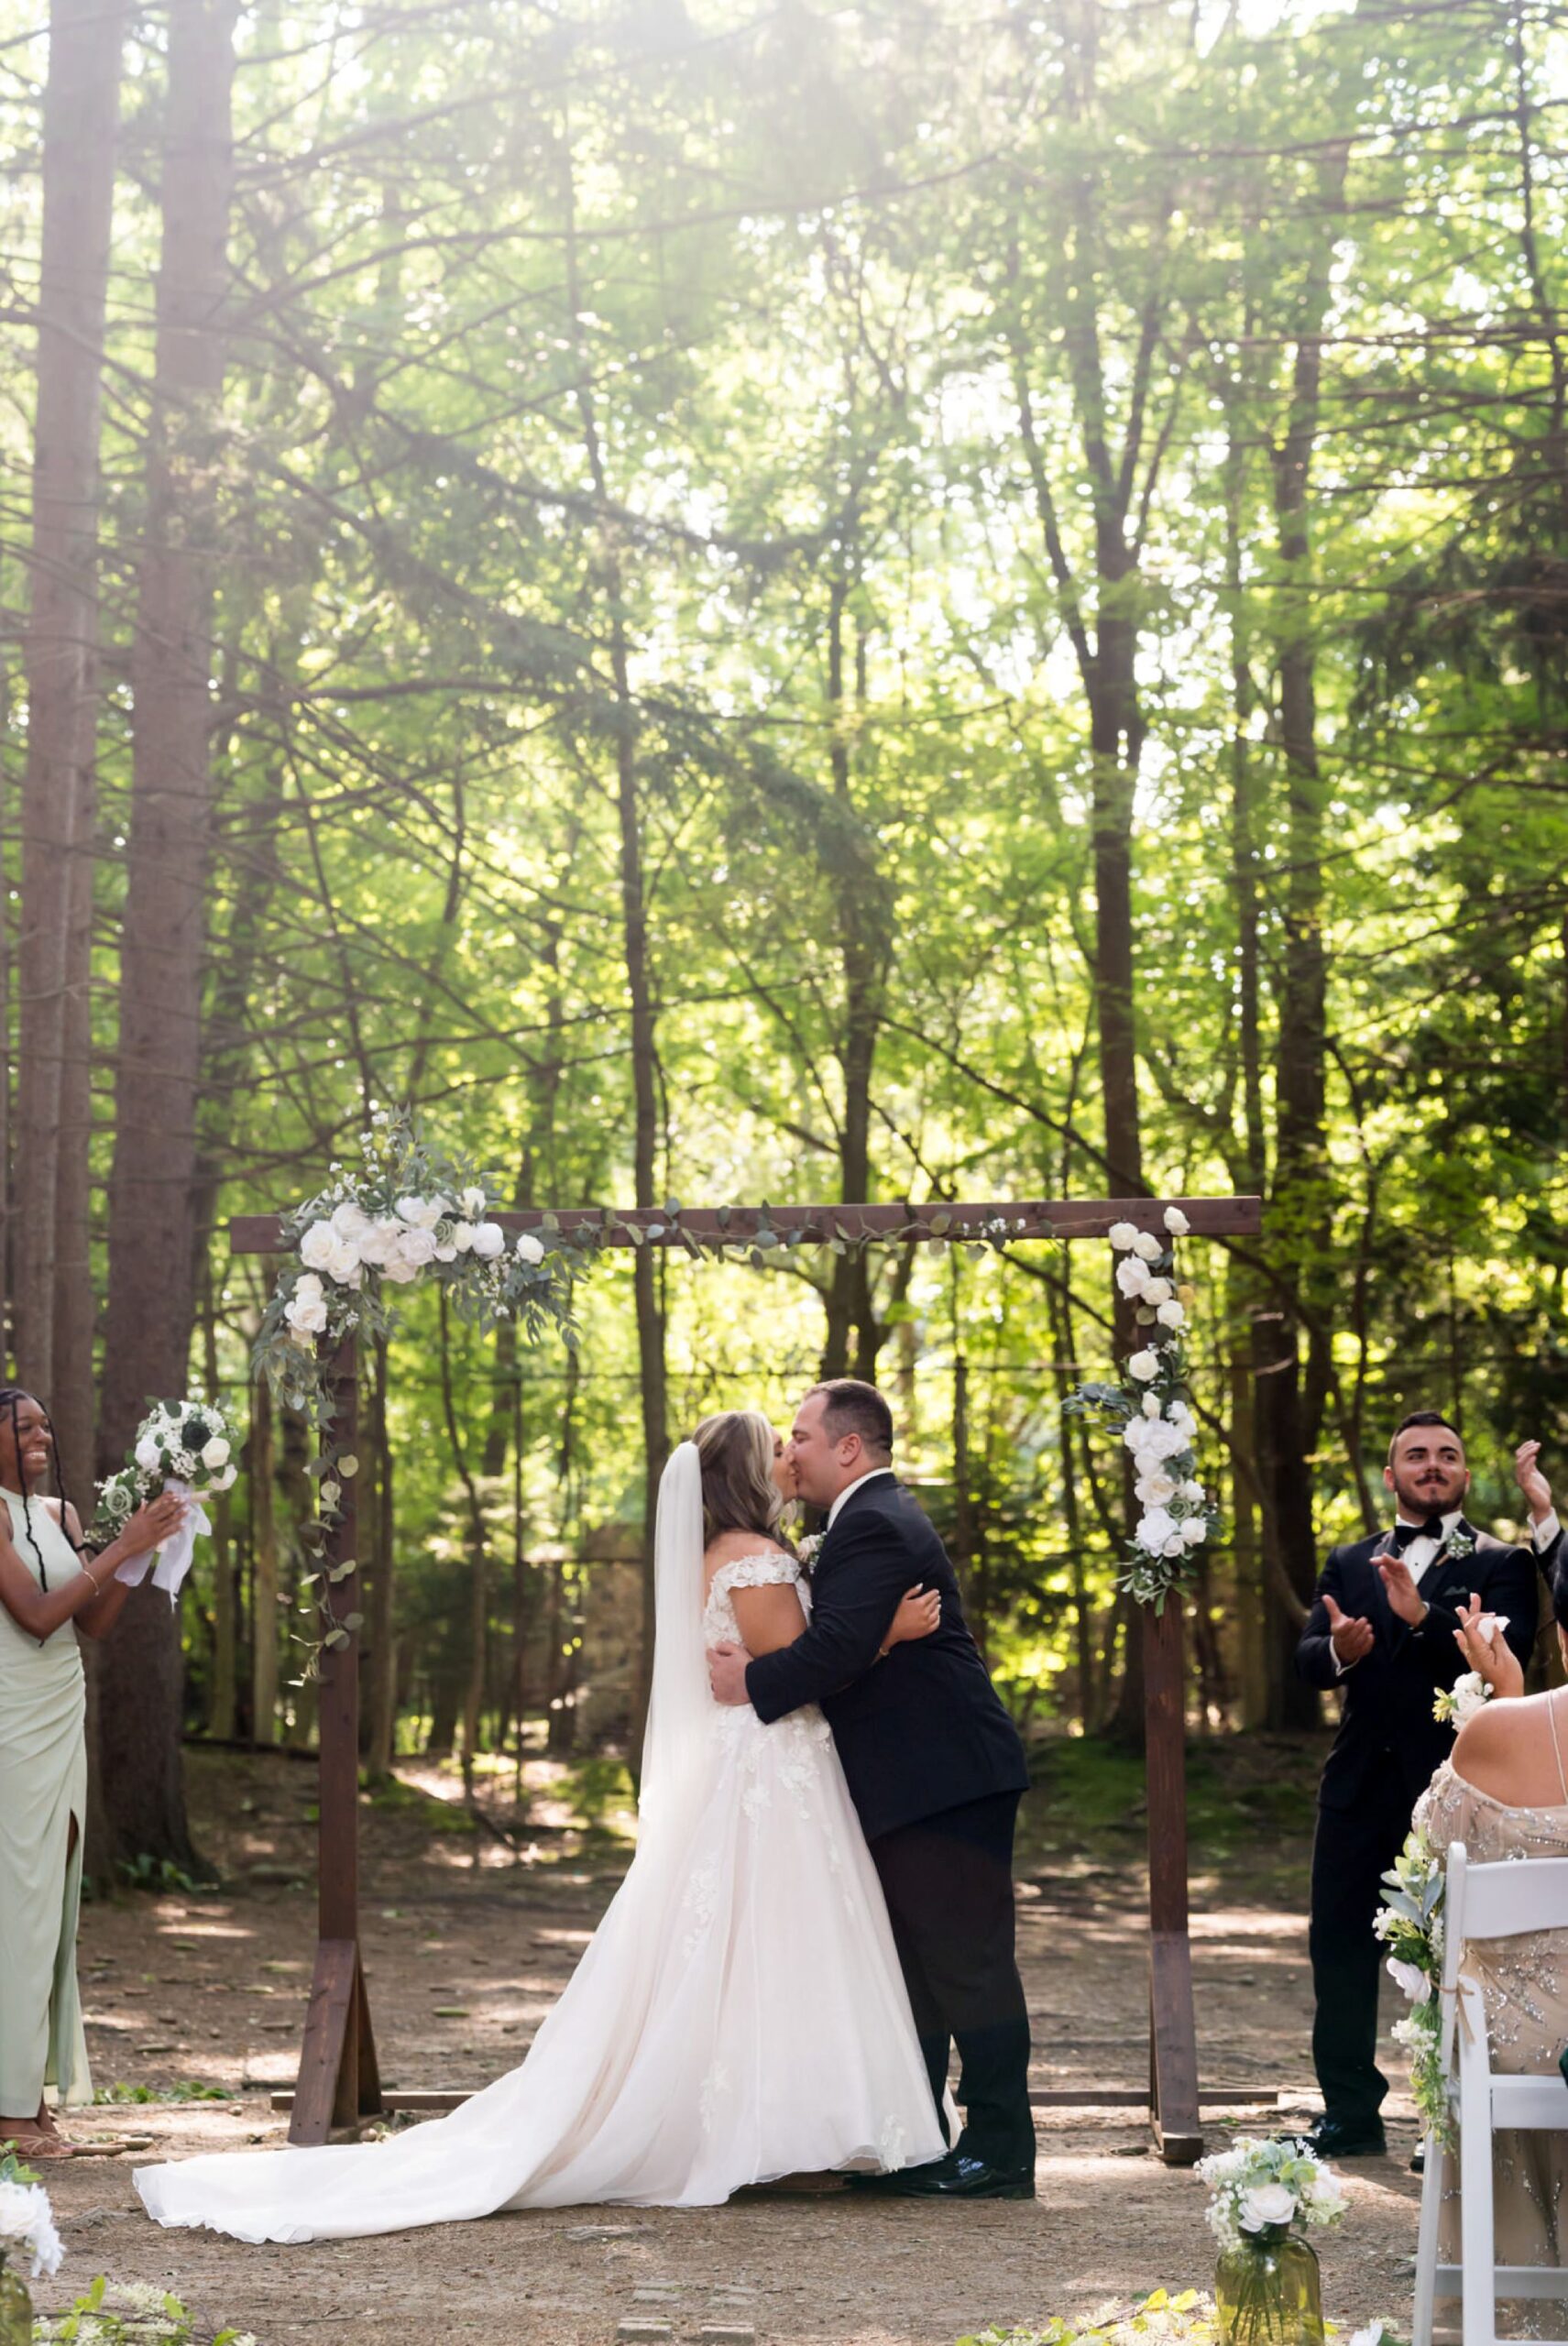 The bride and groom kiss at their Stony Creek wedding in The Pines.  